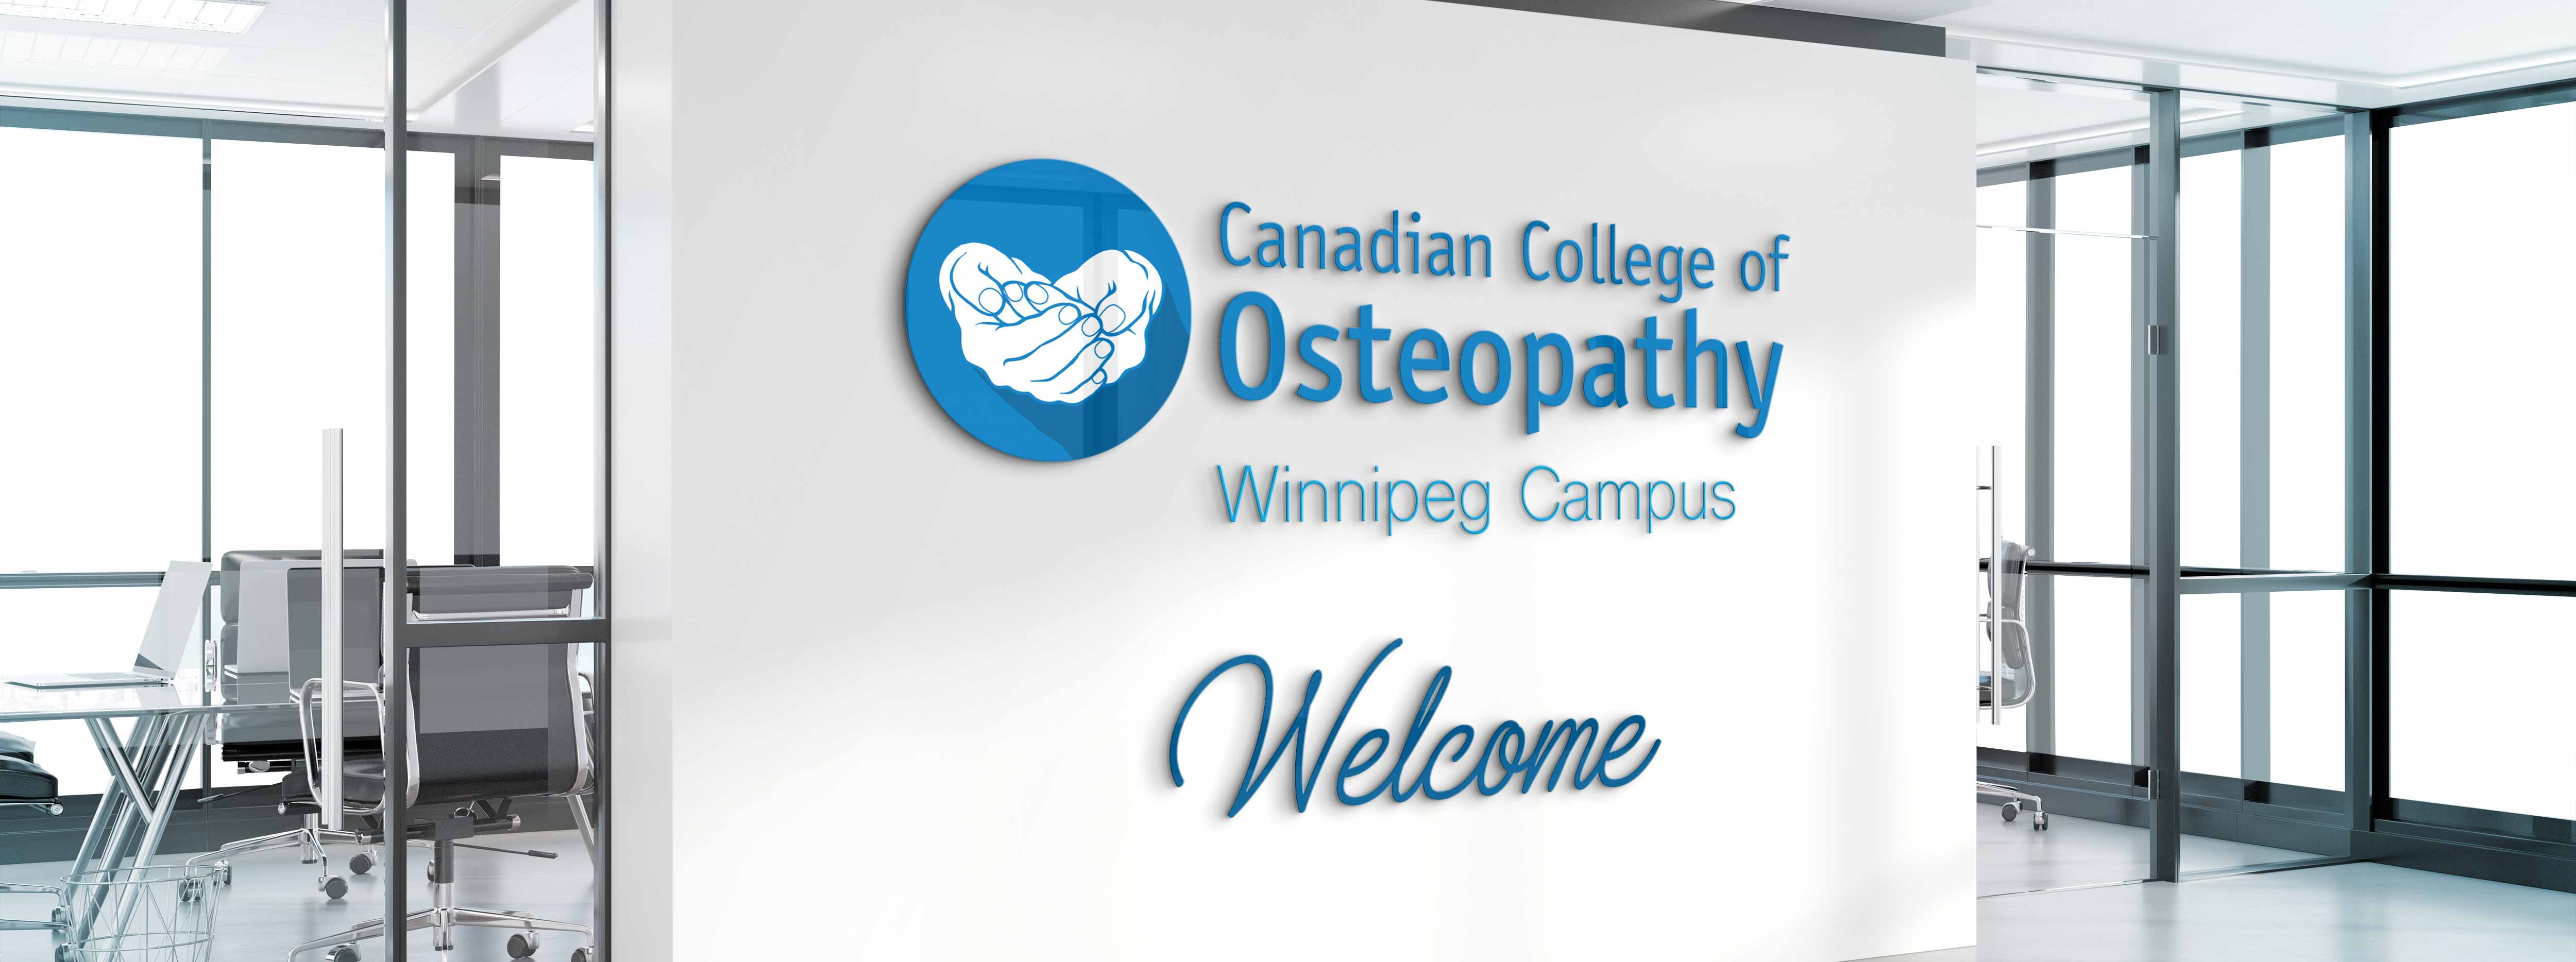 Welcome to the Canadian College of Osteopathy